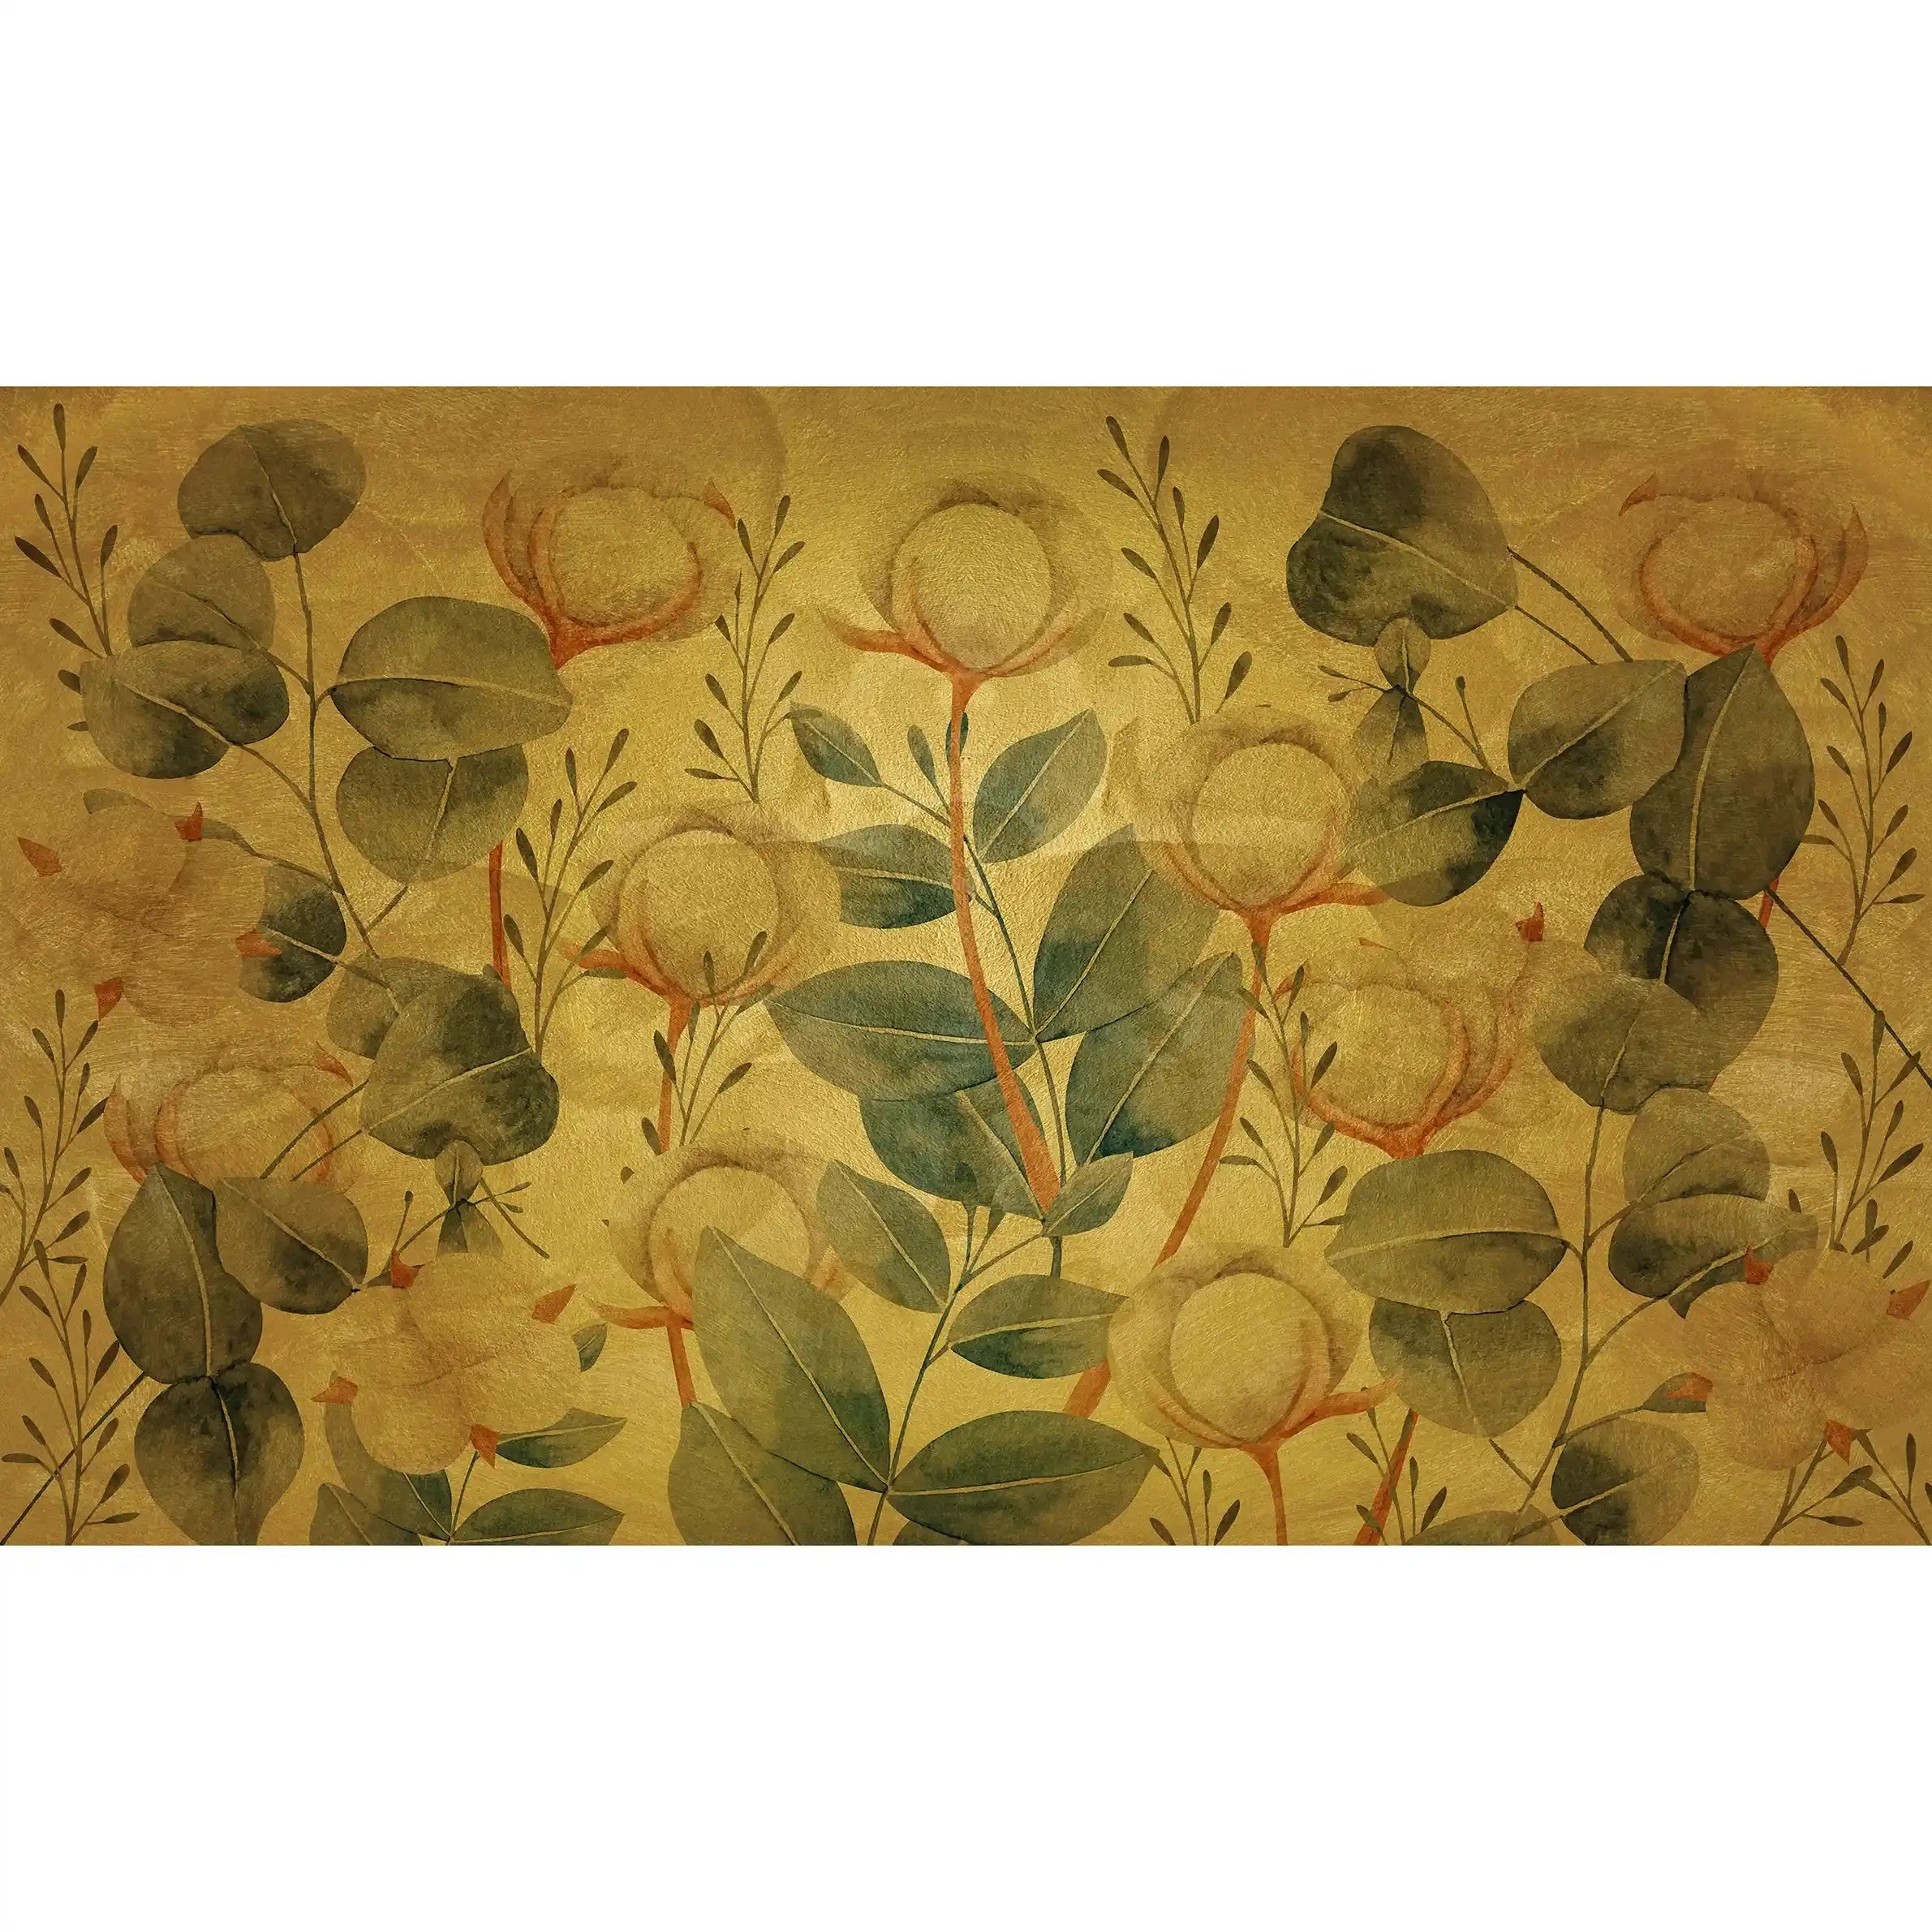 3035-C / Floral Wall Decor: Peelable, Stickable Wallpaper with Tulips Design on Gold Background, Ideal for Room Decor - Artevella